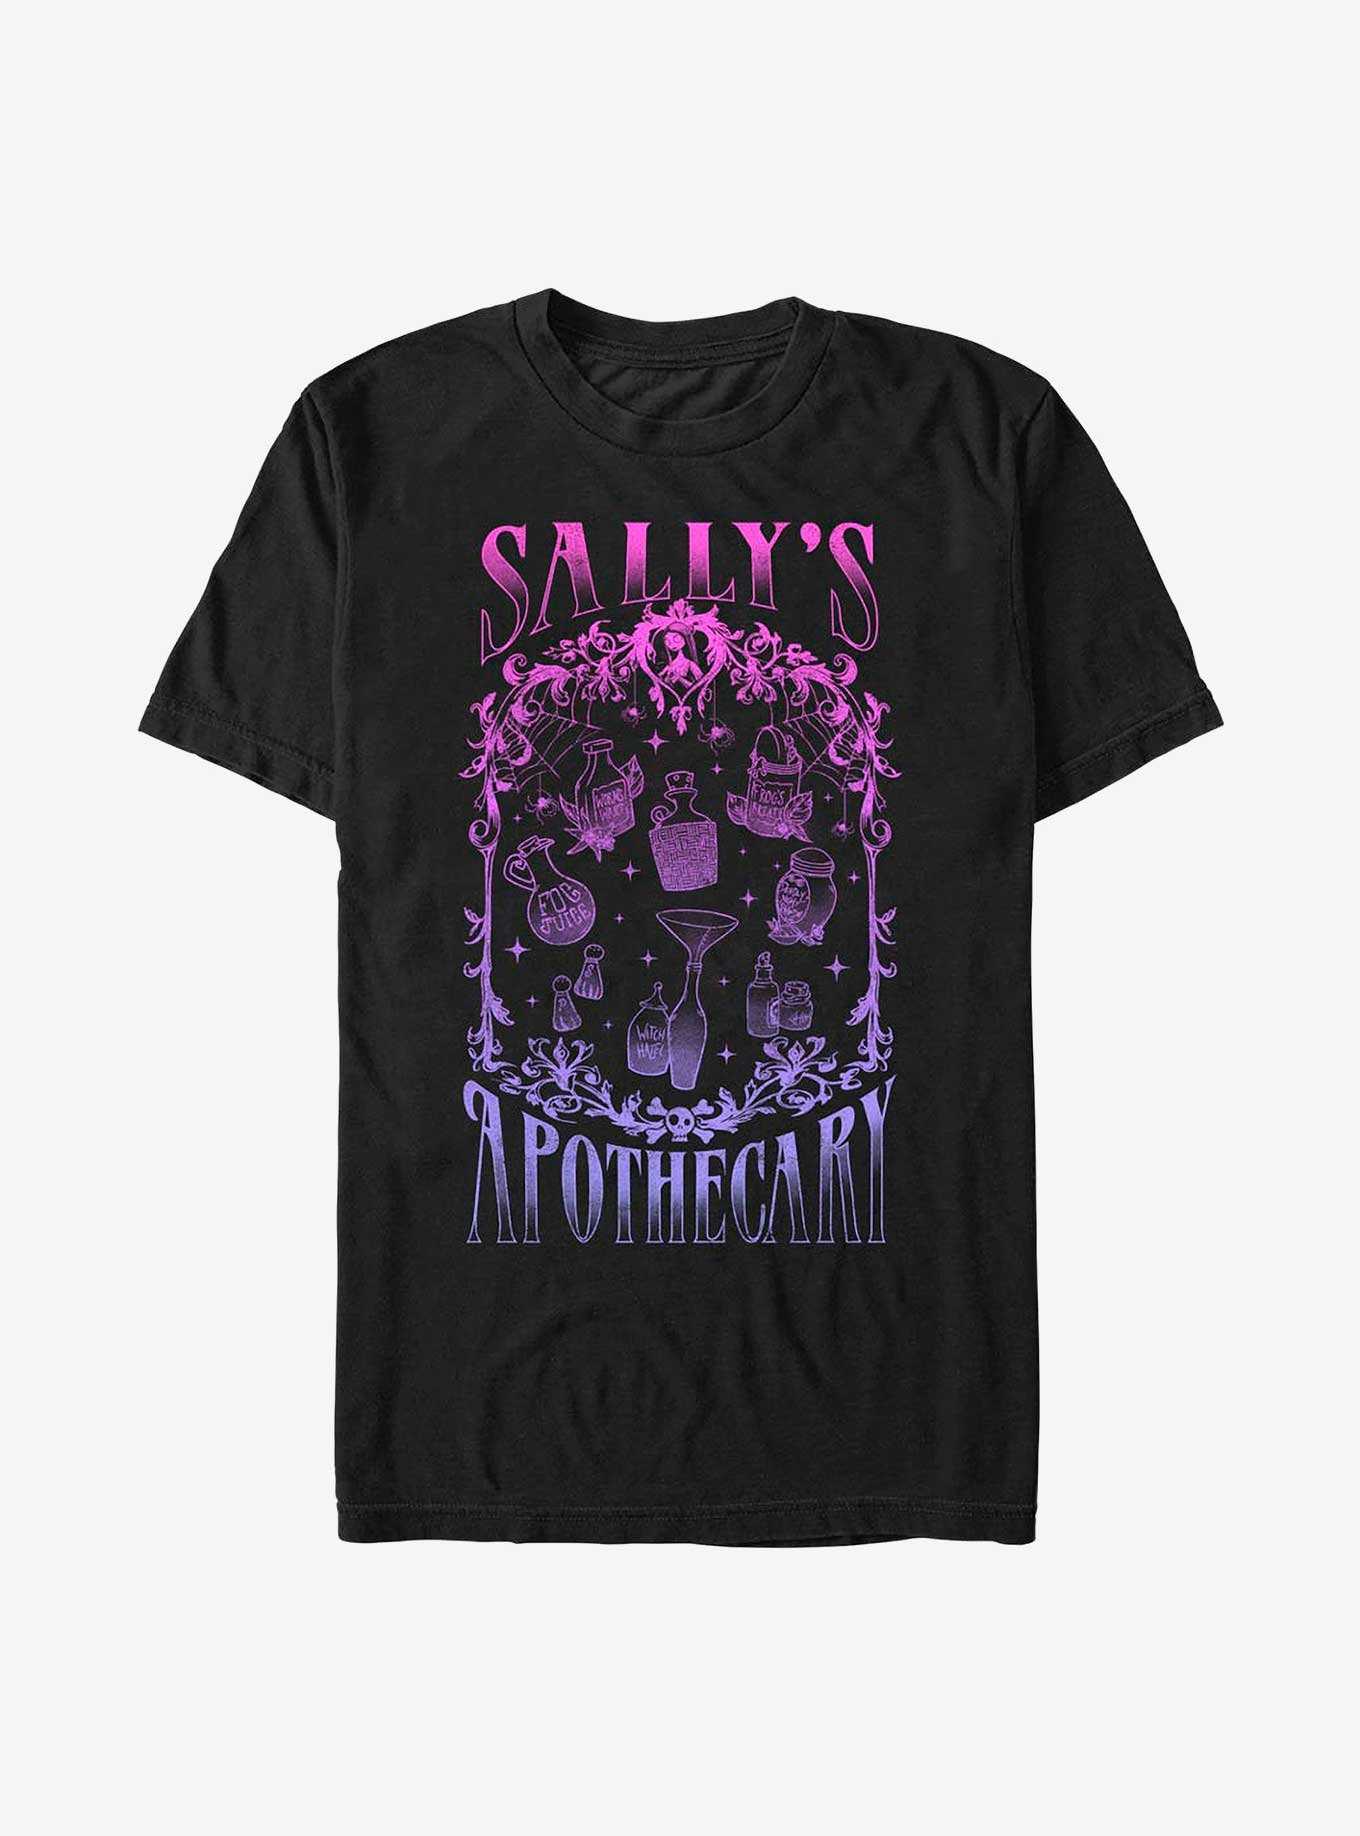 Disney The Nightmare Before Christmas Sally's Apothecary T-Shirt, , hi-res